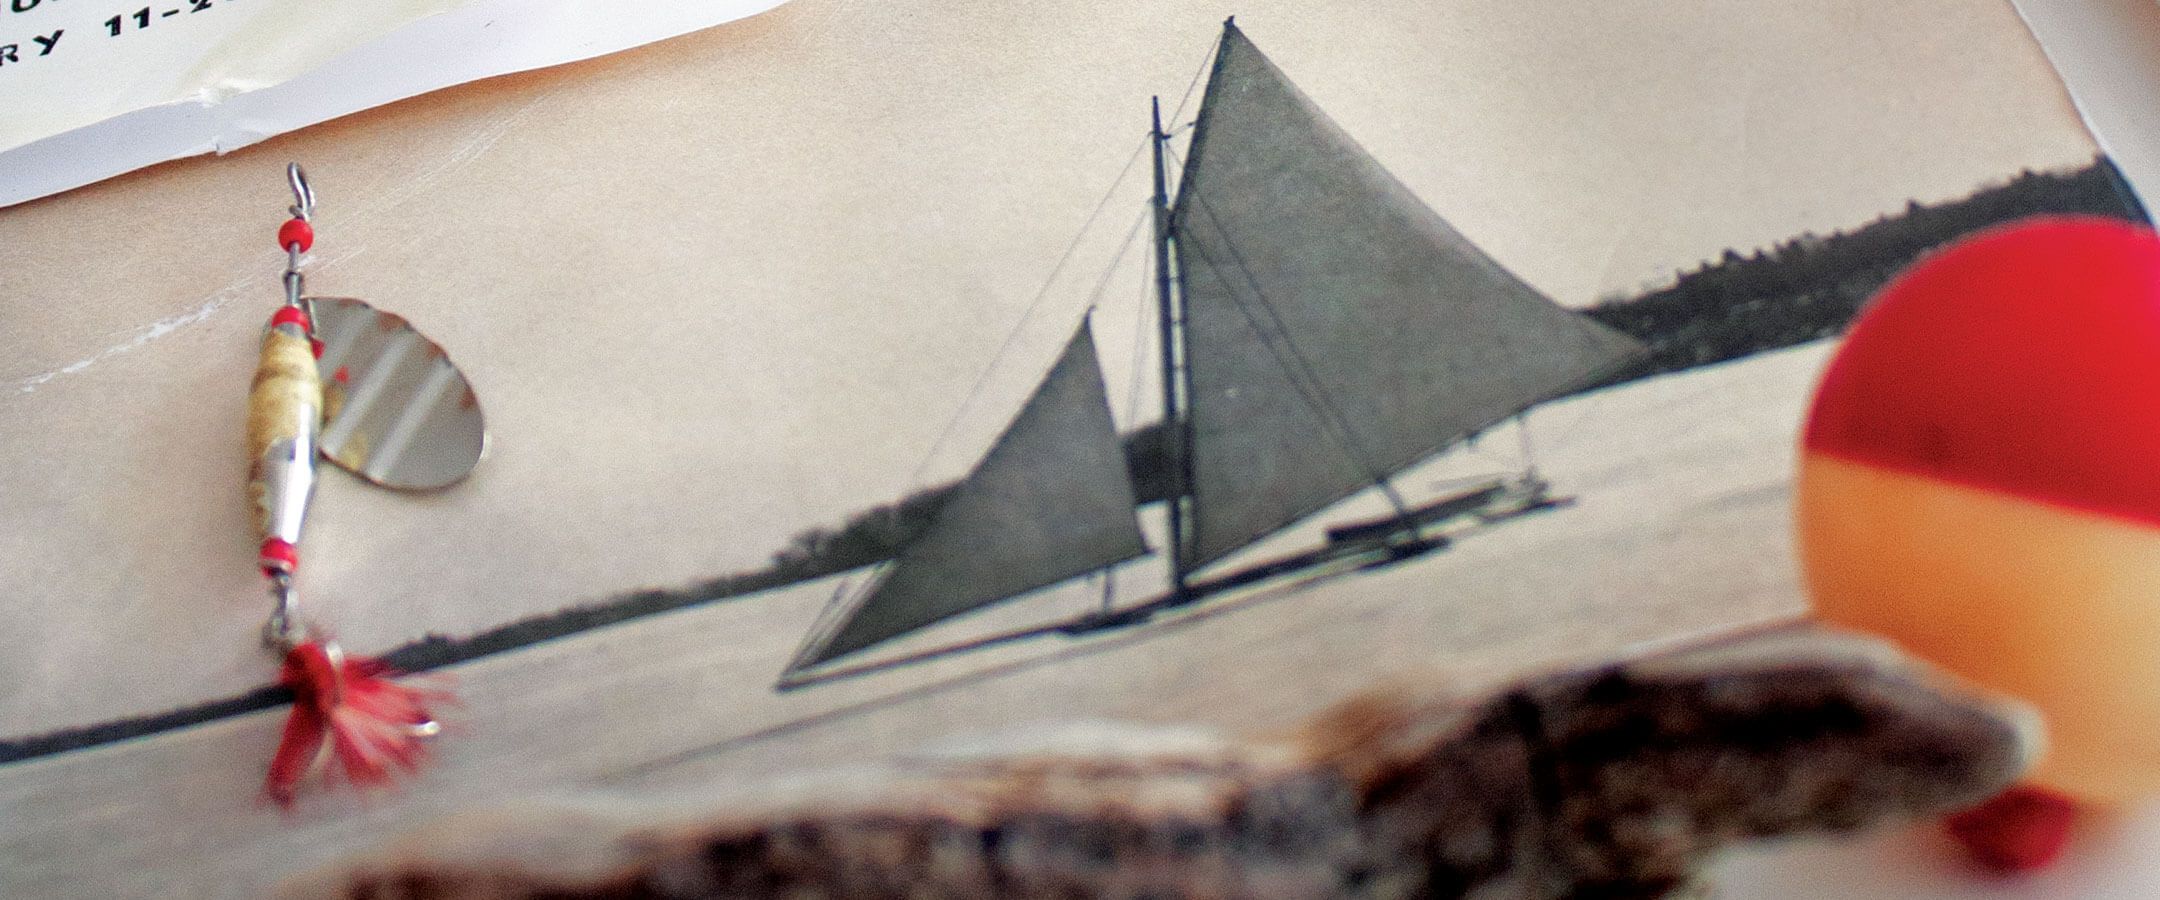 A fishing lure rests atop the left side of a photograph of a sailboat. There is a piece of driftwood and a bobber in the foreground in front of the photograph.